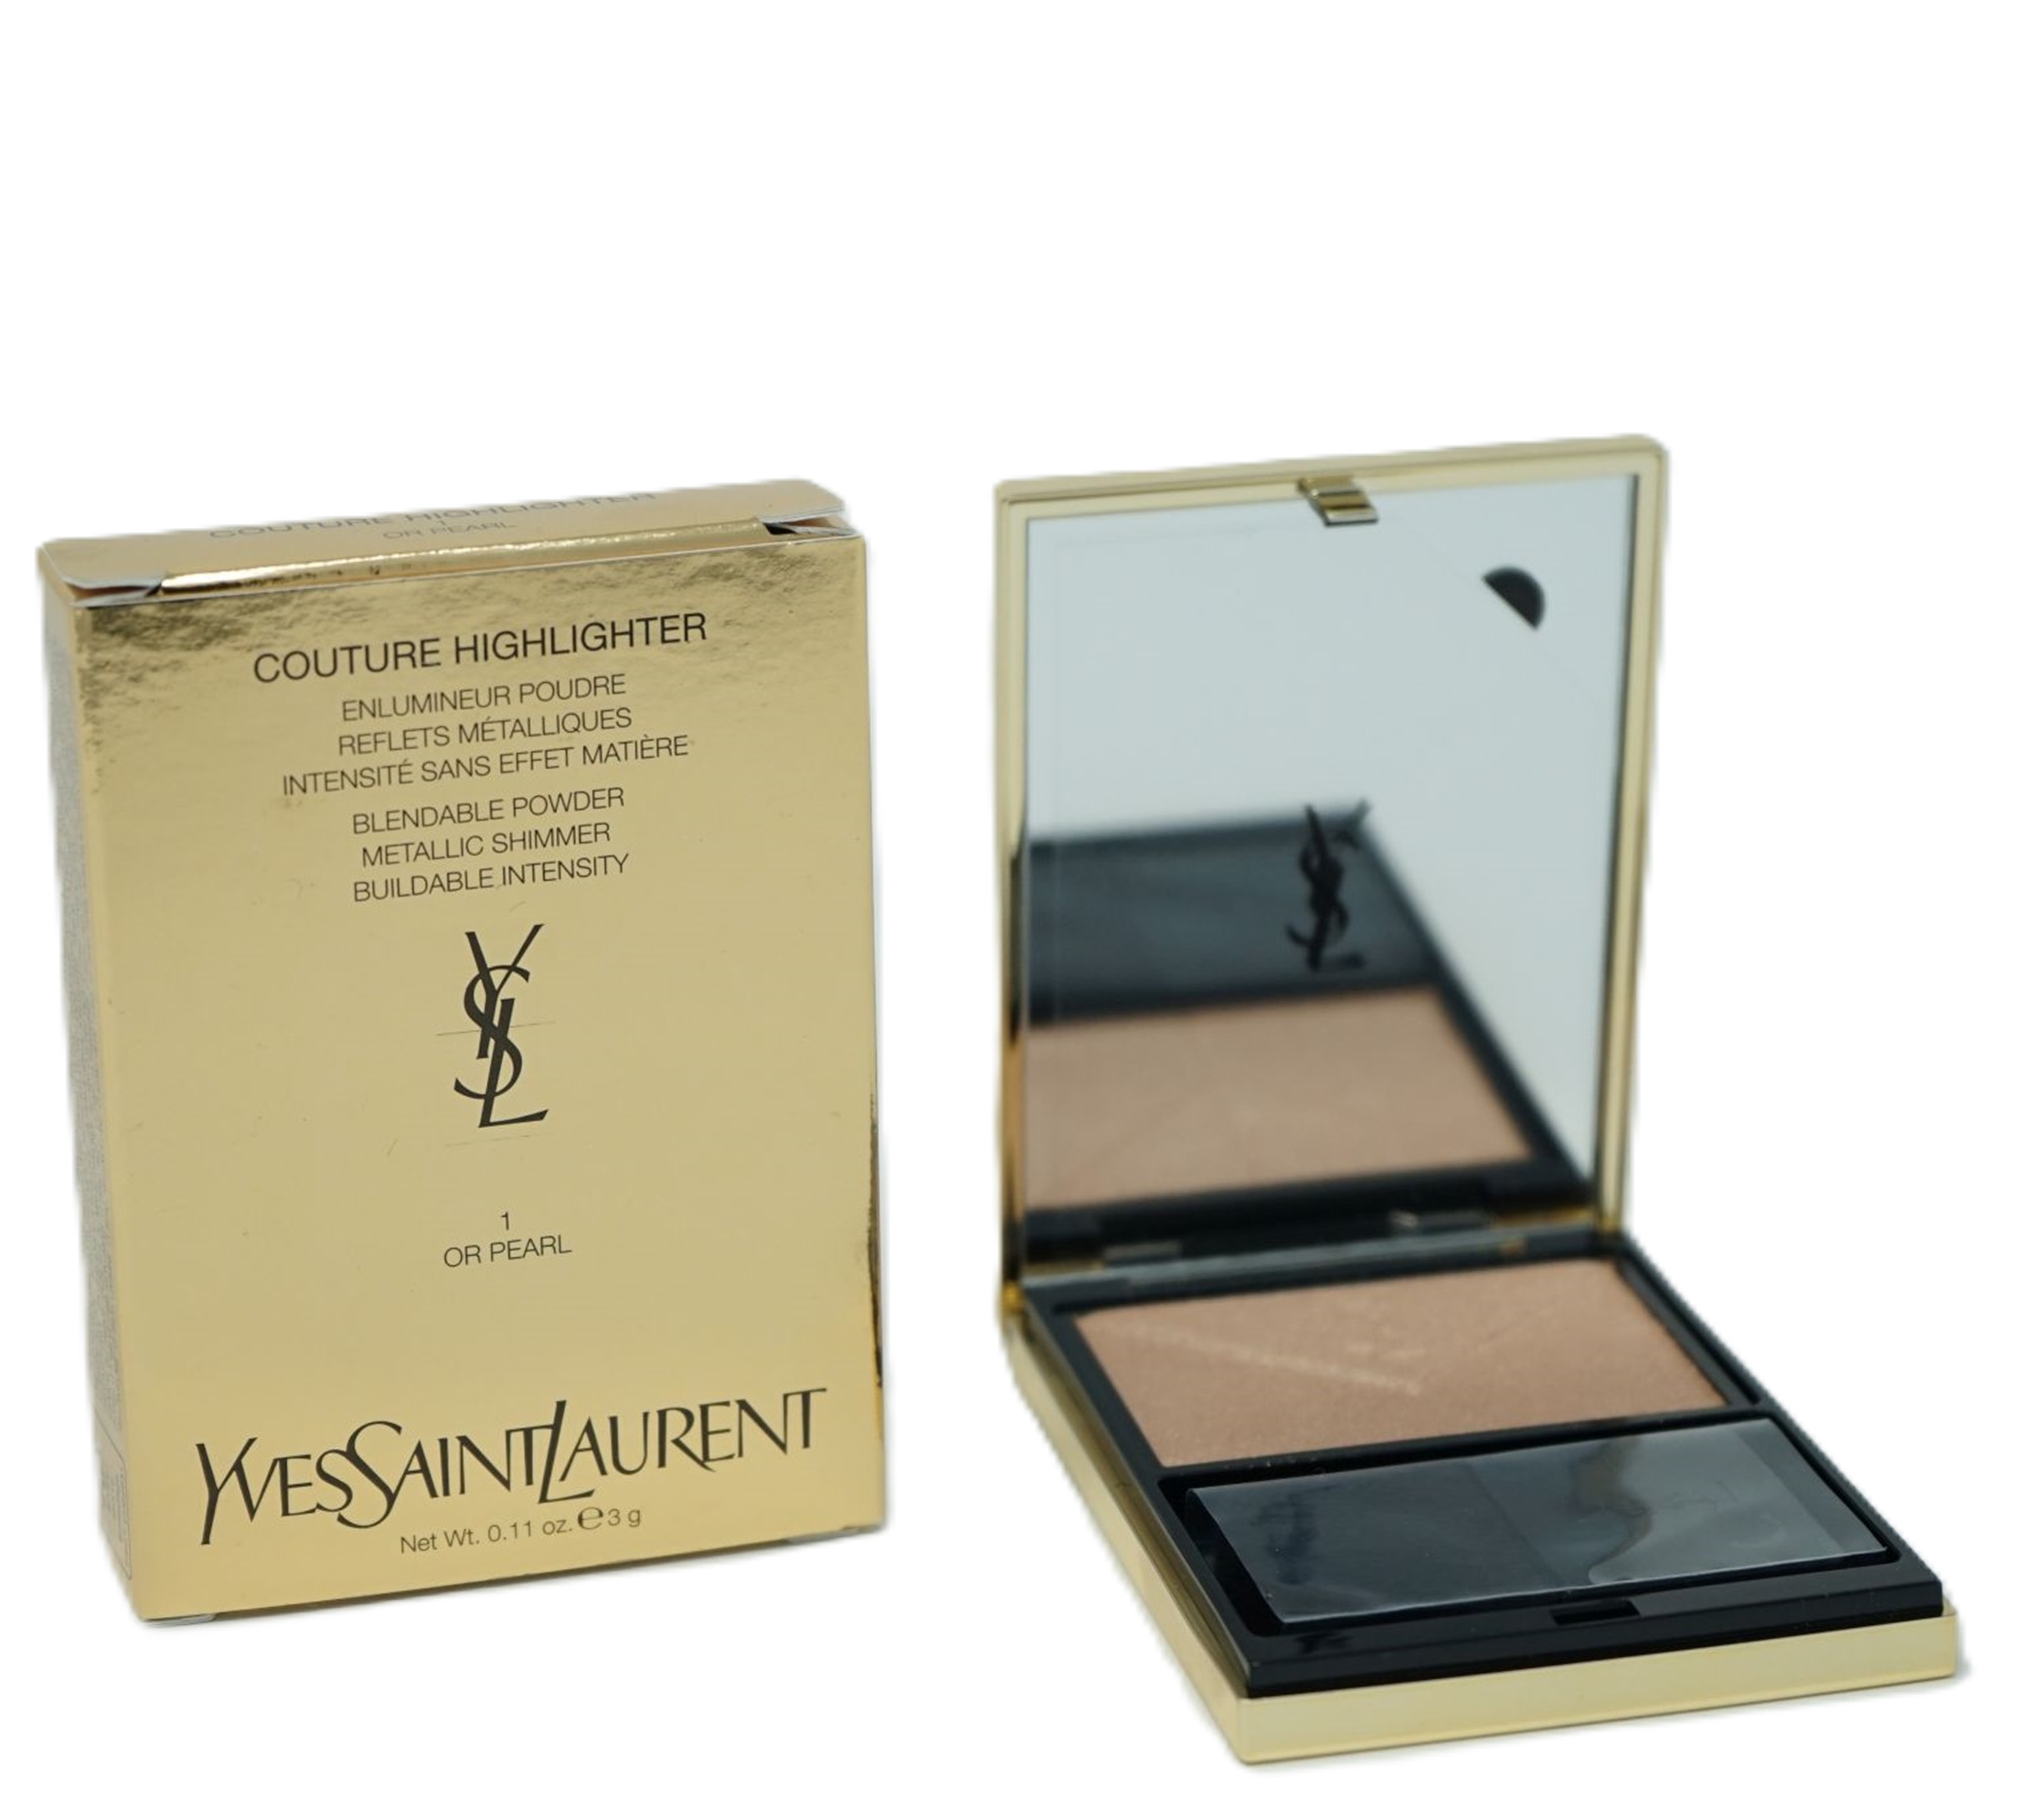 Yves Saint Laurent  Couture Highlighter Metallic Shimmer Powder 1 Or Pearl 3g